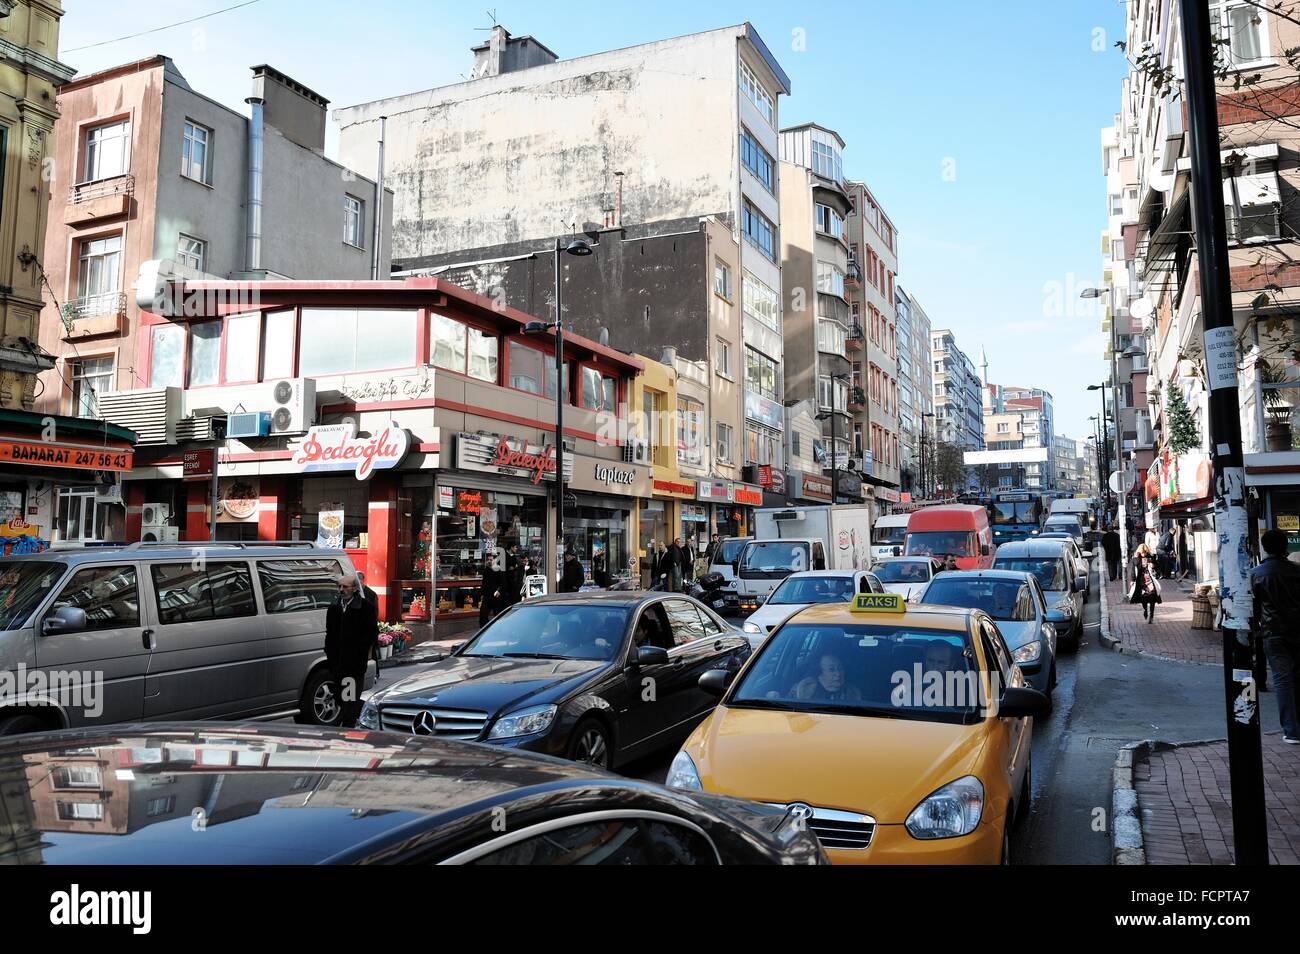 Istanbul, street scene with yellow taxi in traffic Stock Photo